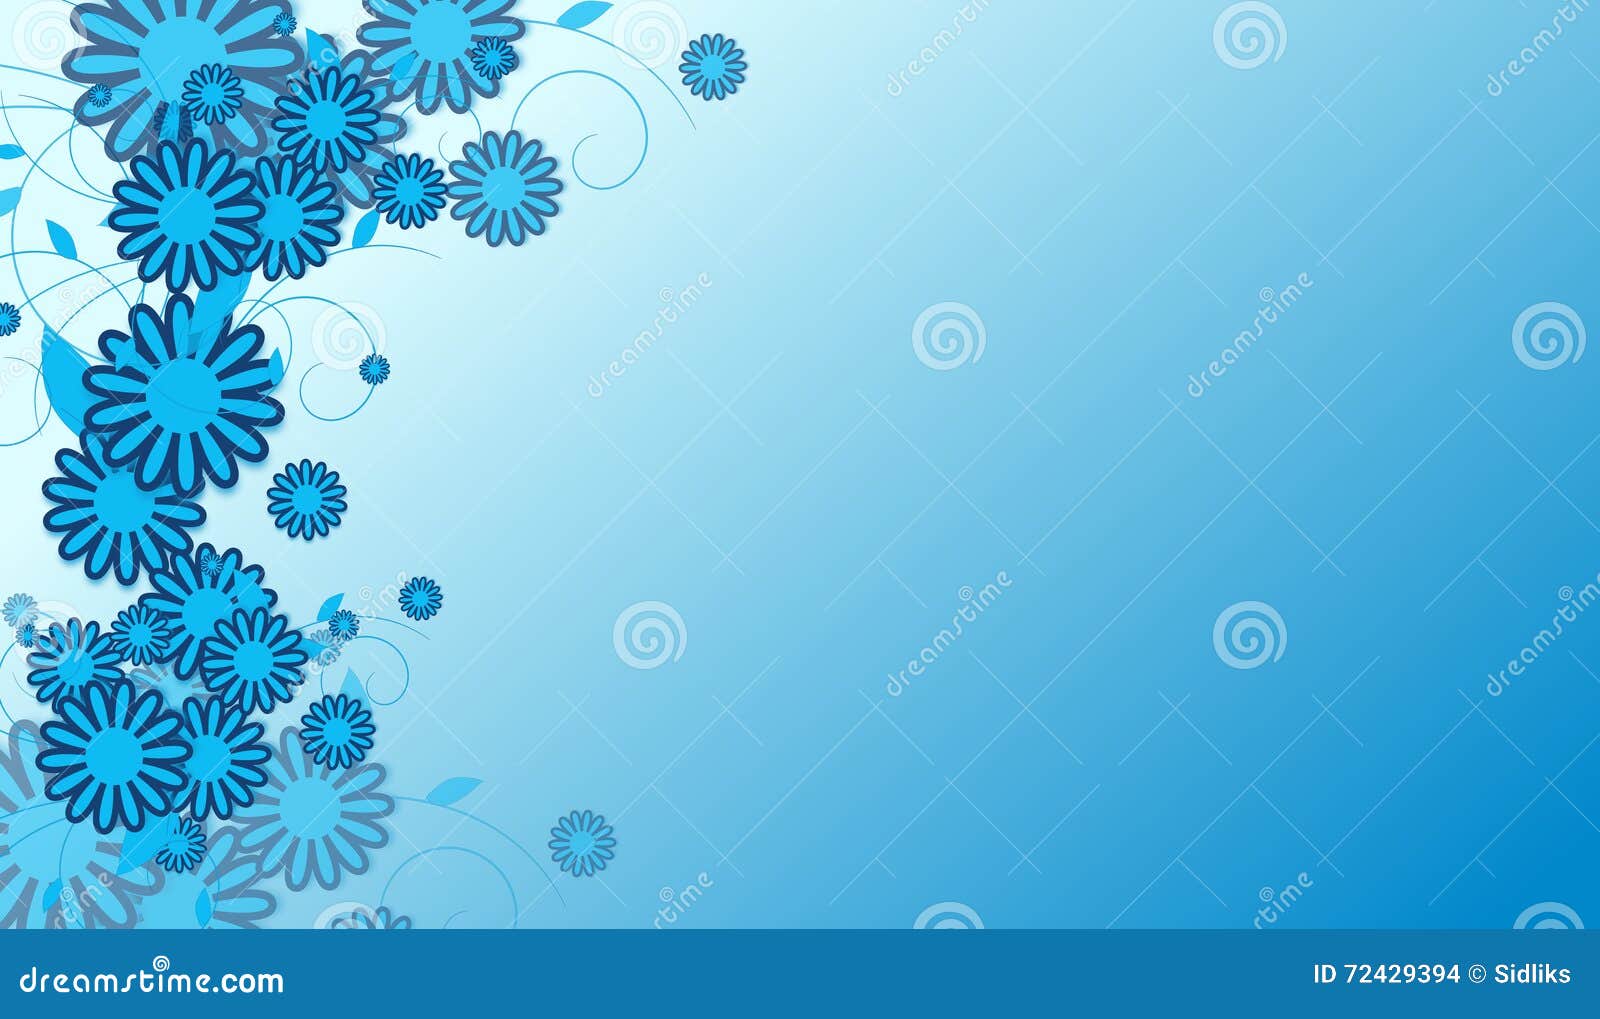 Blue Abstract Background with Flowers Stock Illustration - Illustration